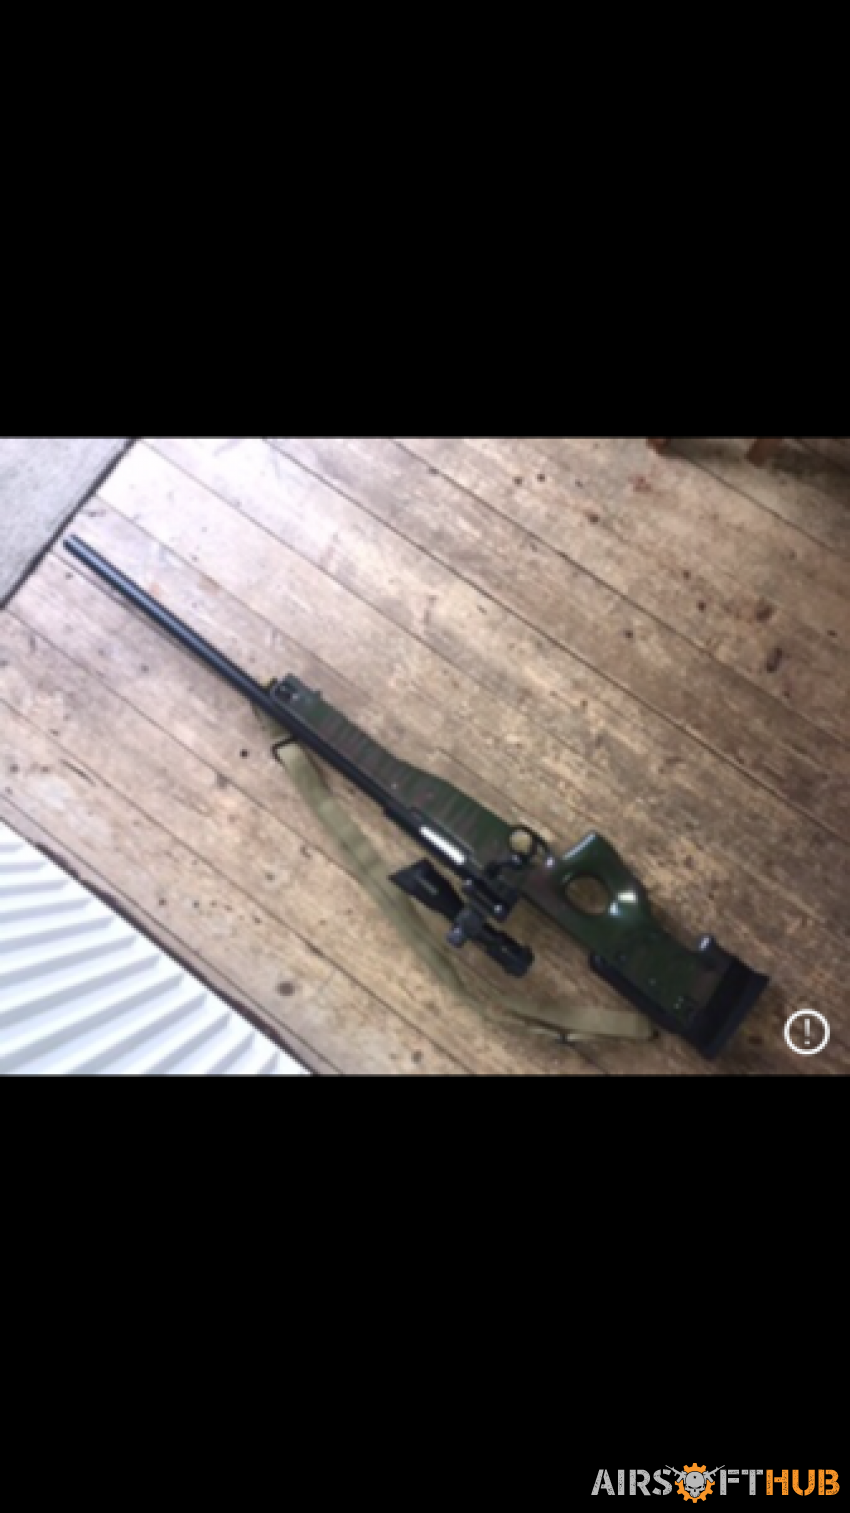 WELL L96 sniper - Used airsoft equipment